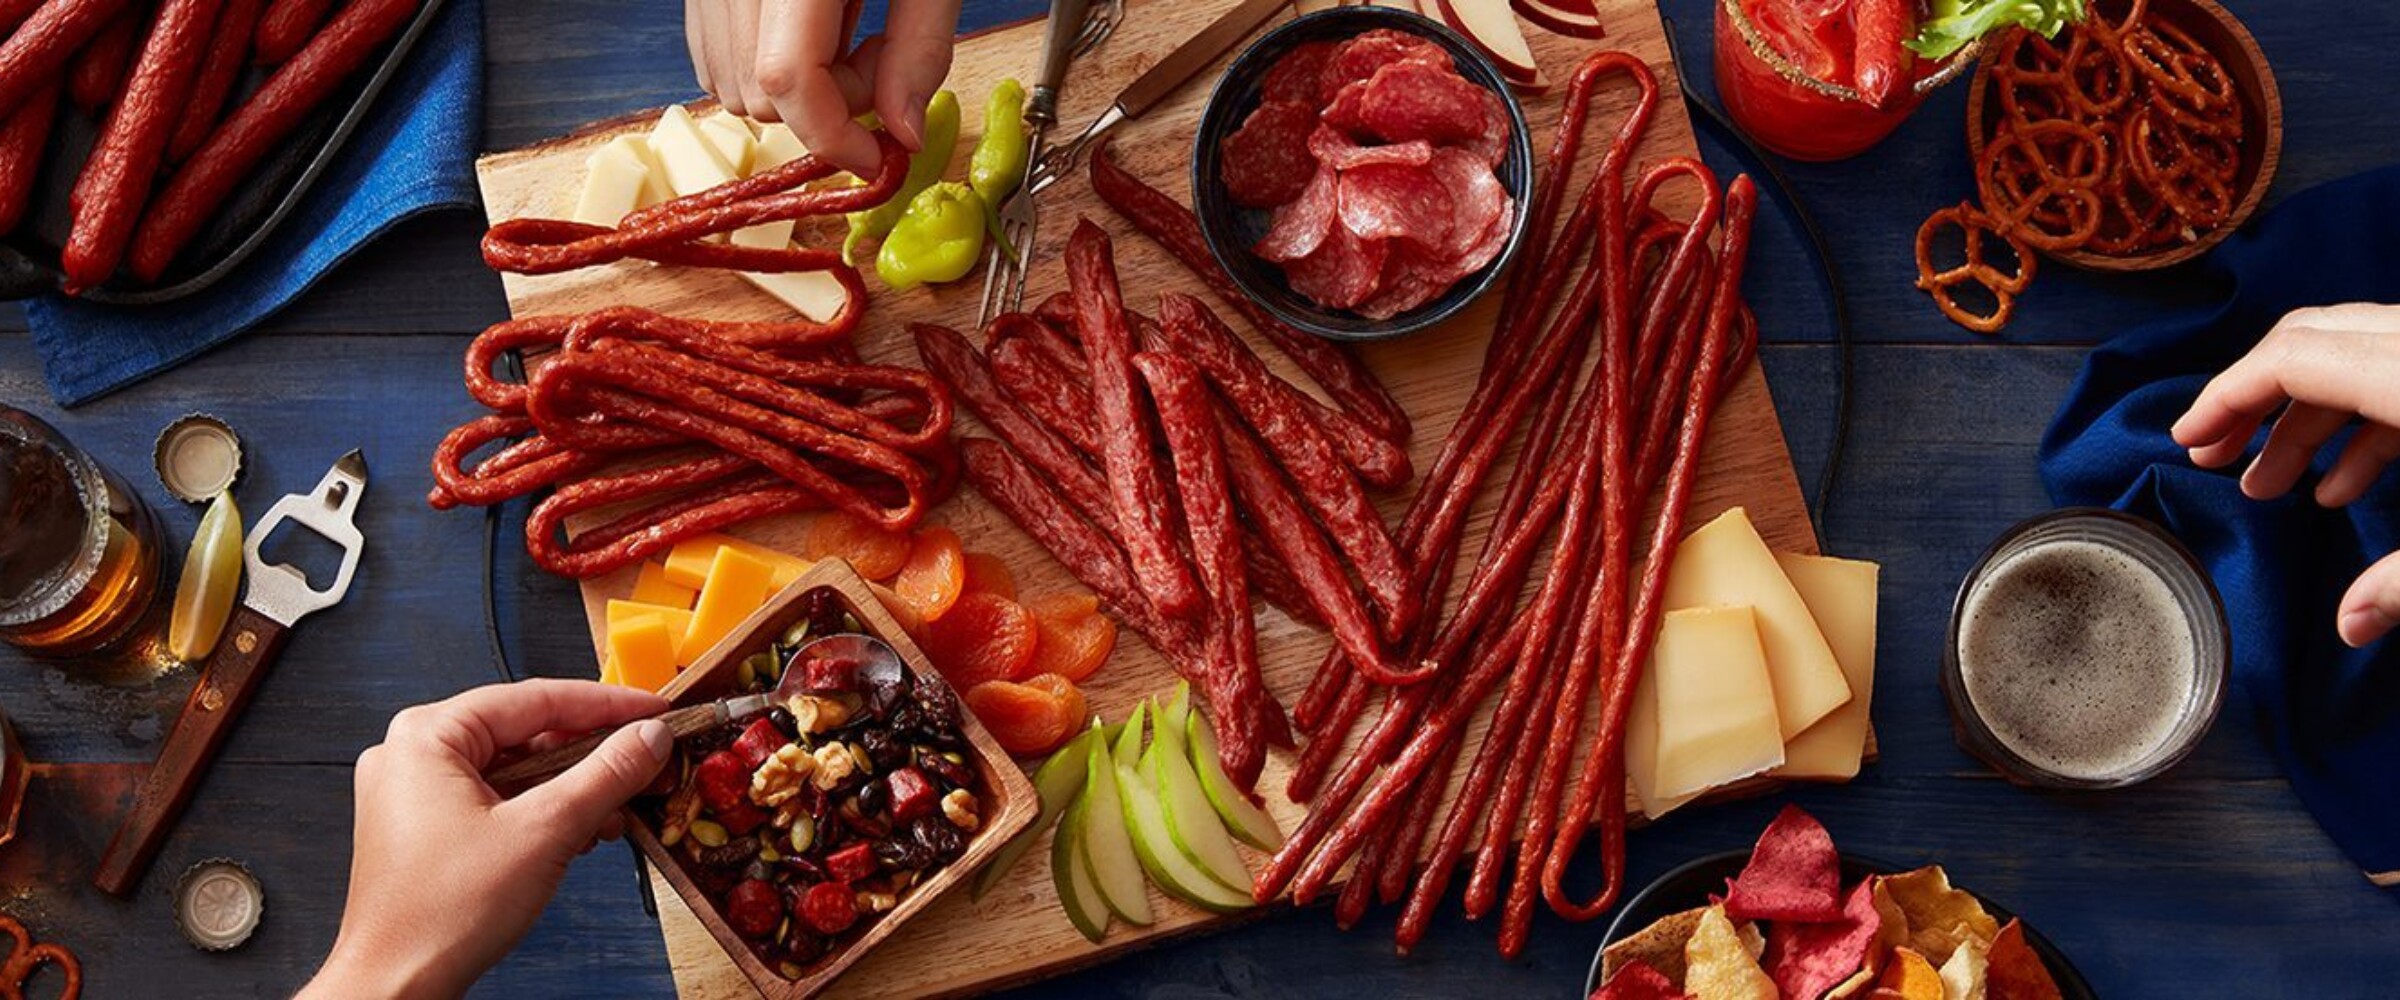 Hands reaching for meat snacks on a board